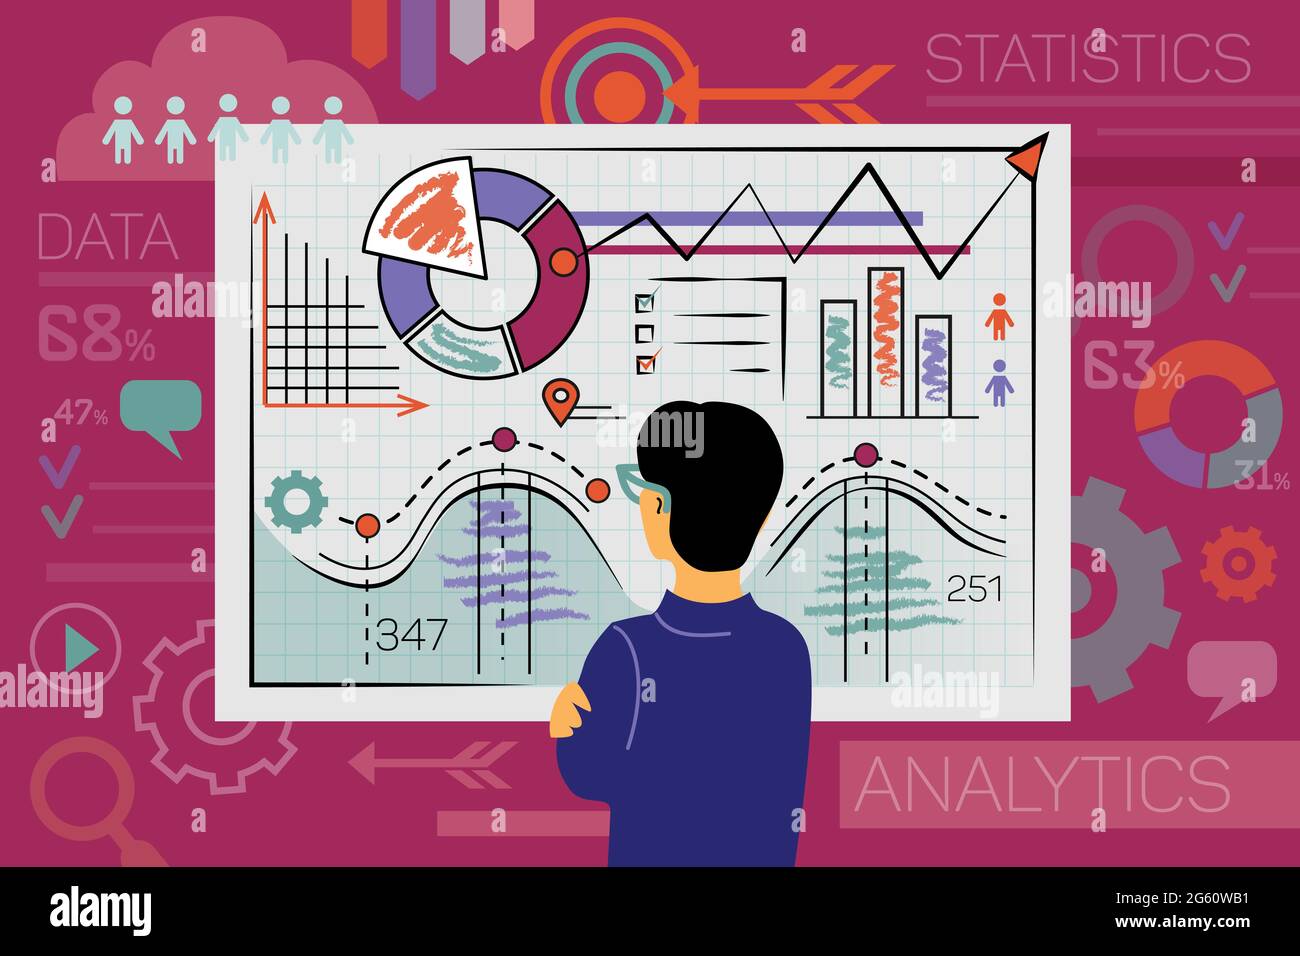 Sales analytics illustration. Office manager and computational data analysis, income statistics, business. Web page cover, banner, template. Stock Photo